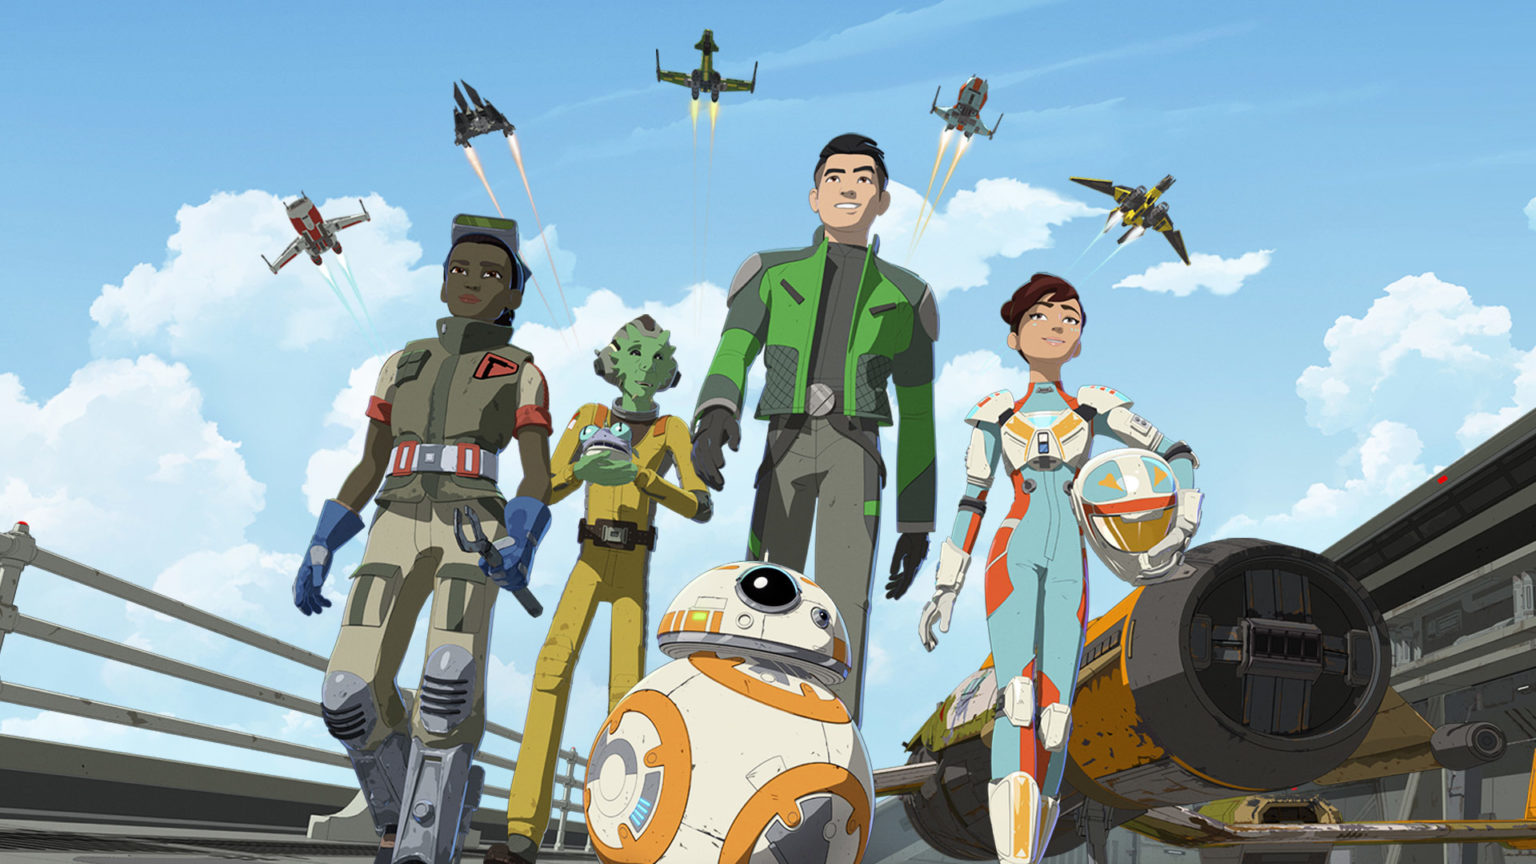 New Star Wars Resistance Featurettes Introduces the Newest Characters Found in a Galaxy Far, Far Away!